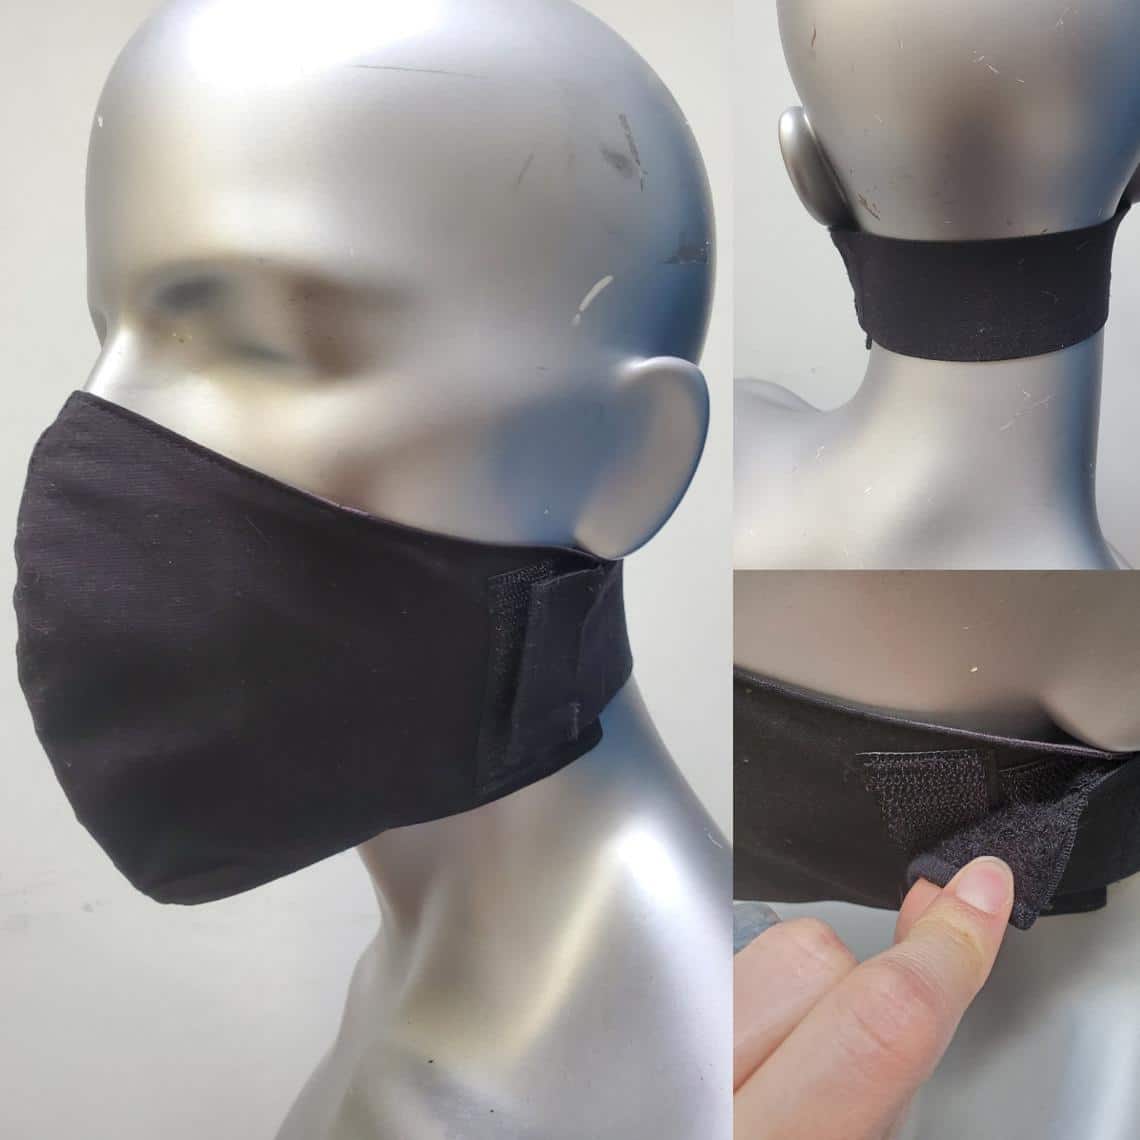 Mask with velcro strap for ease of use with a disability.